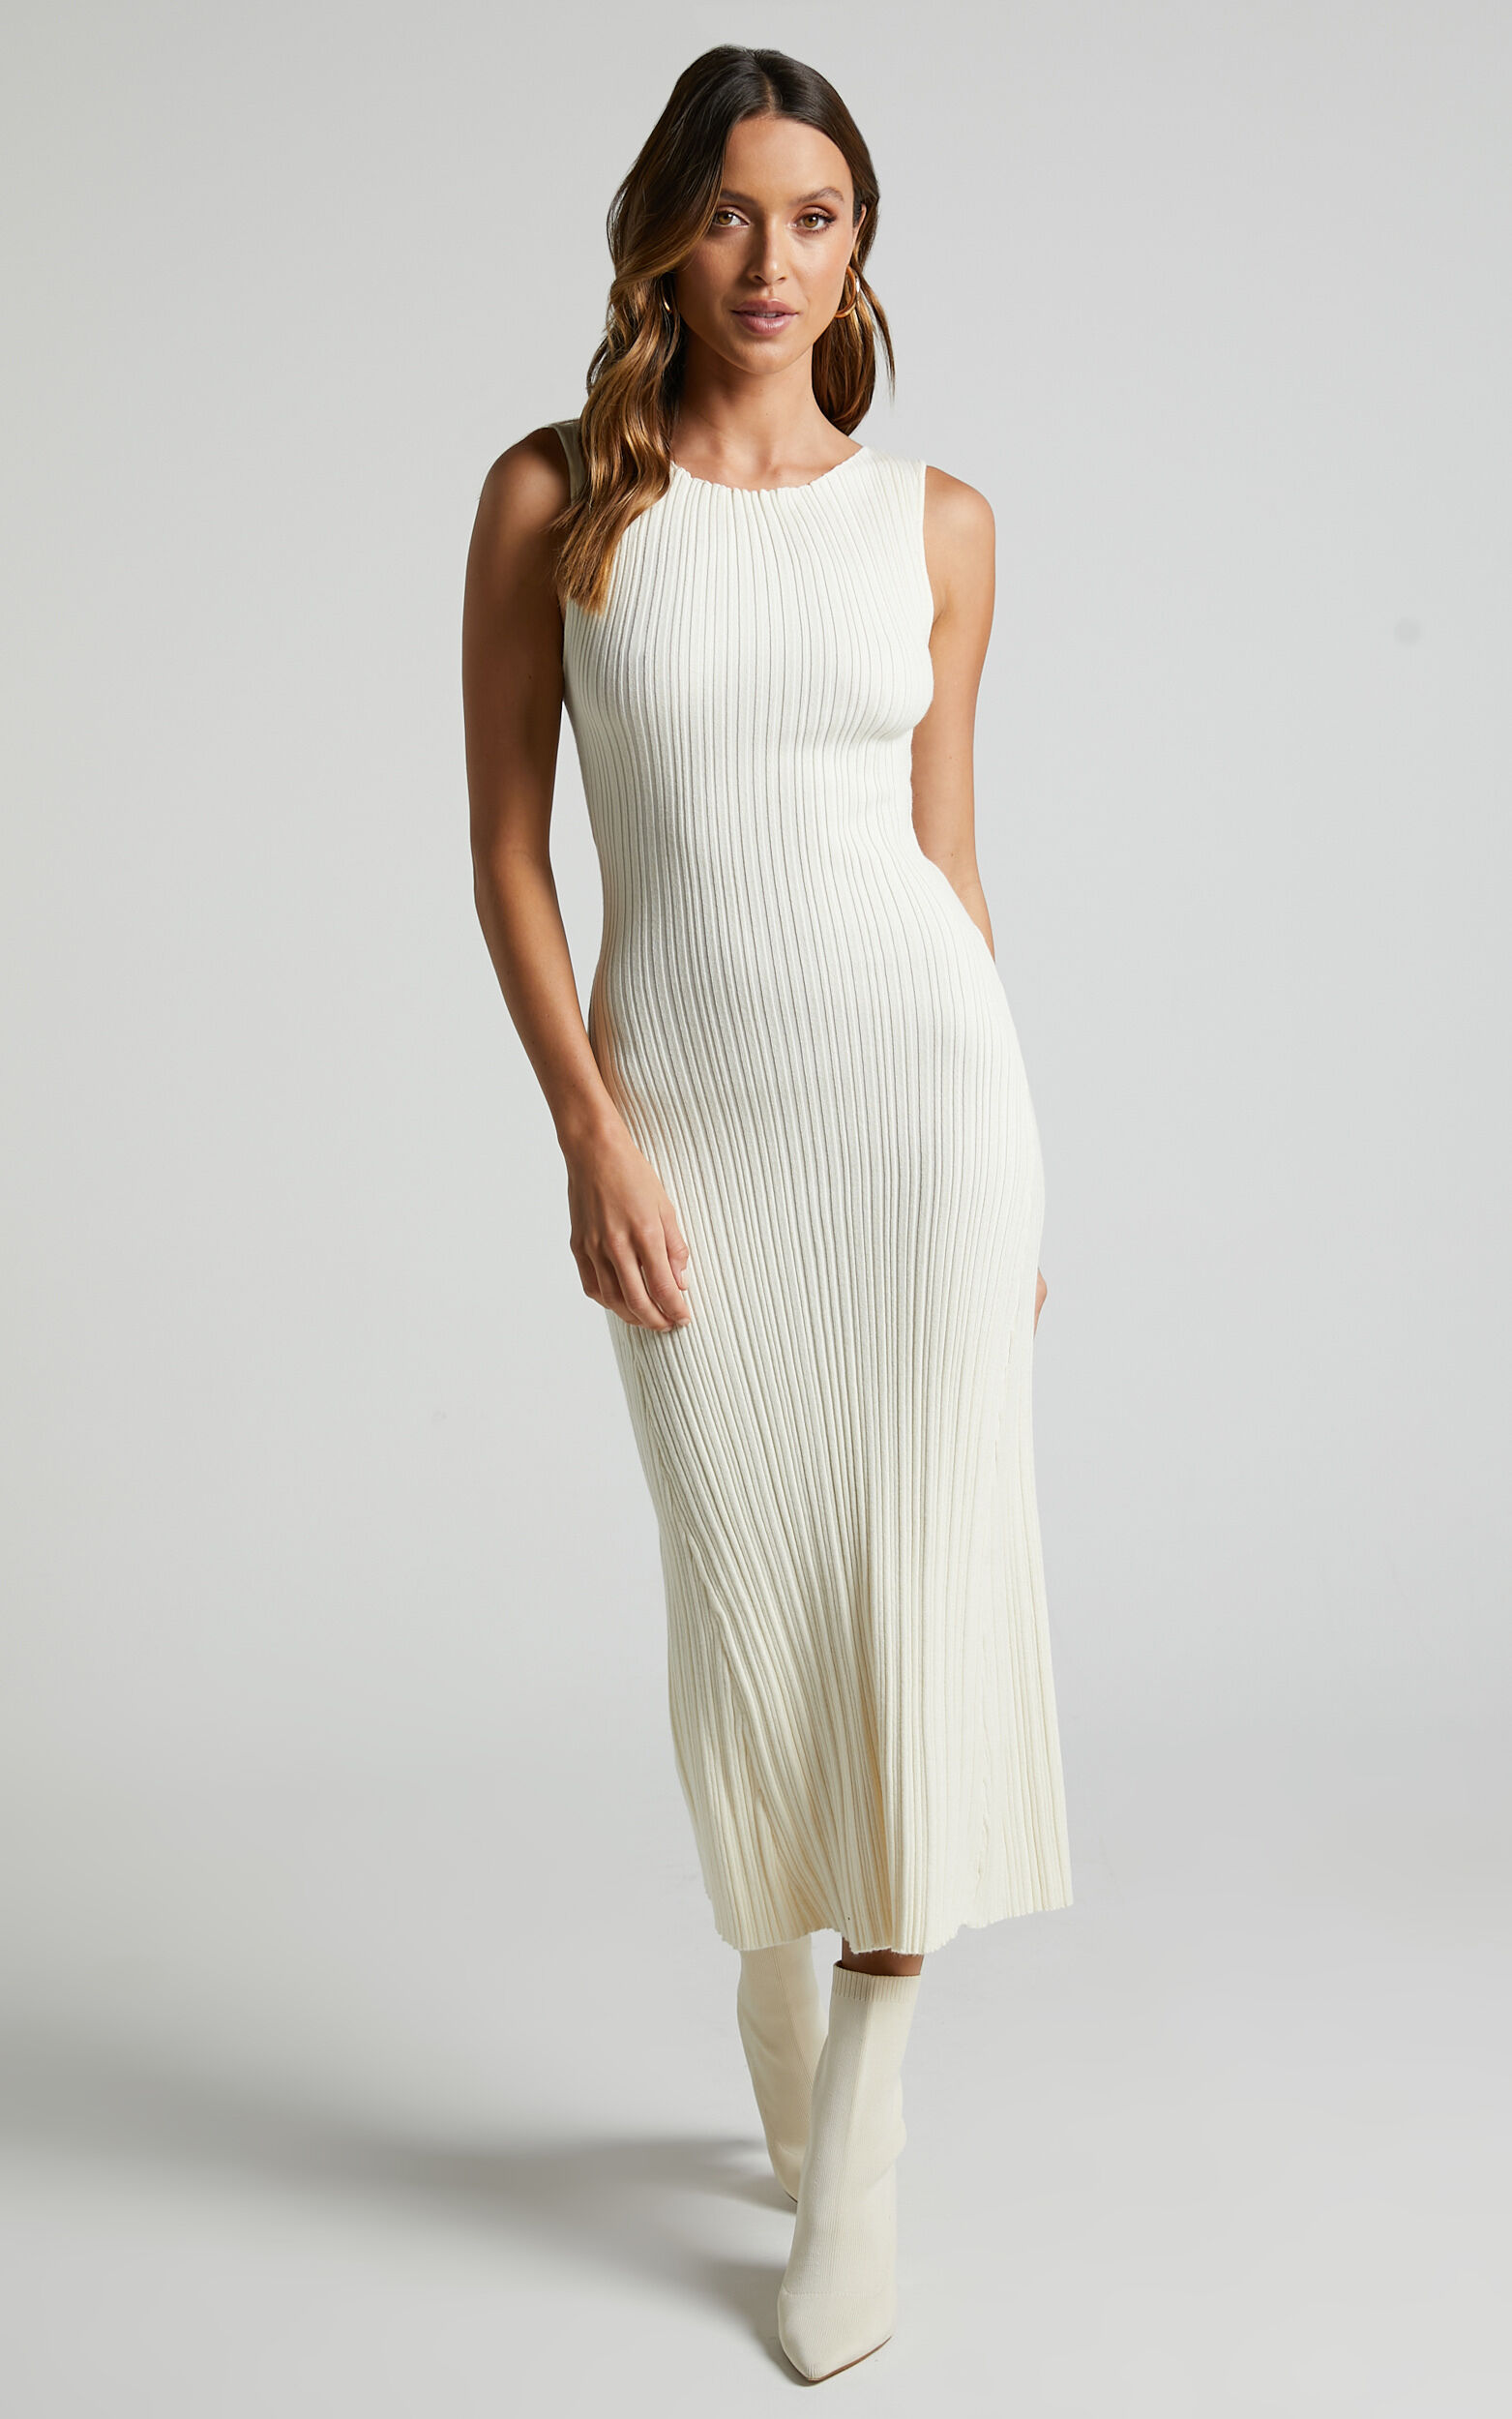 Amanda High Neck Knit Bodycon Midi Dress in Butter Yellow - M/L, YEL1, super-hi-res image number null